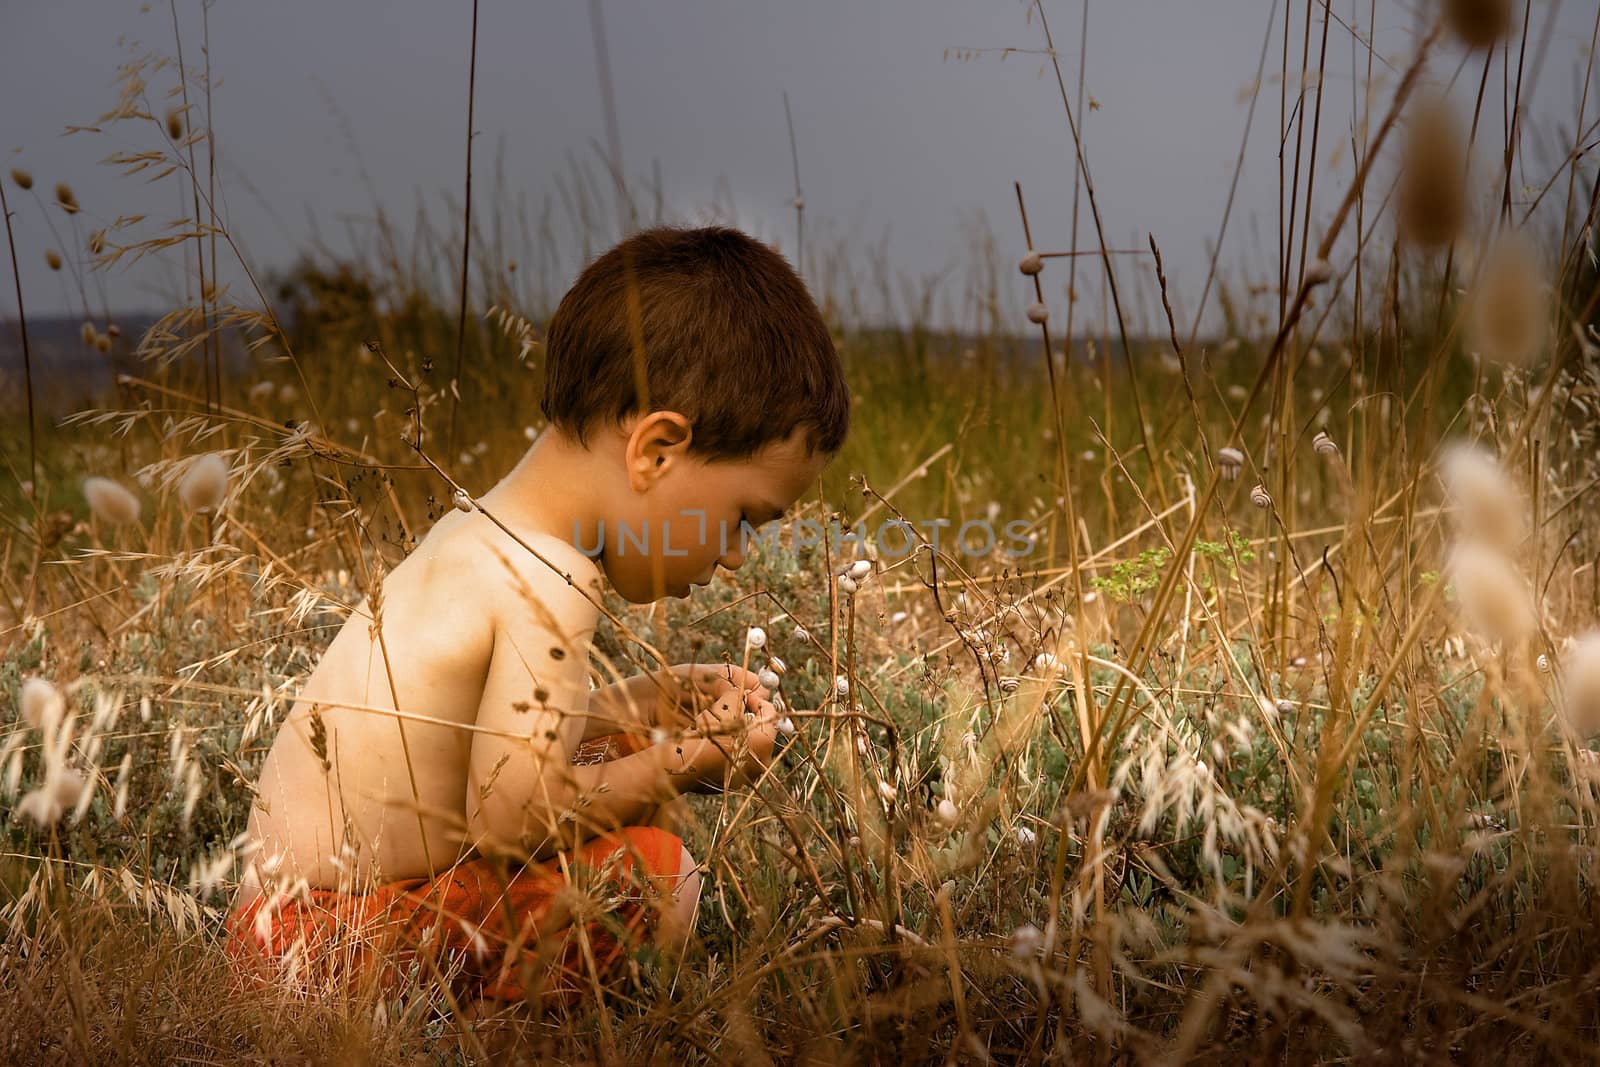 A young child in nature